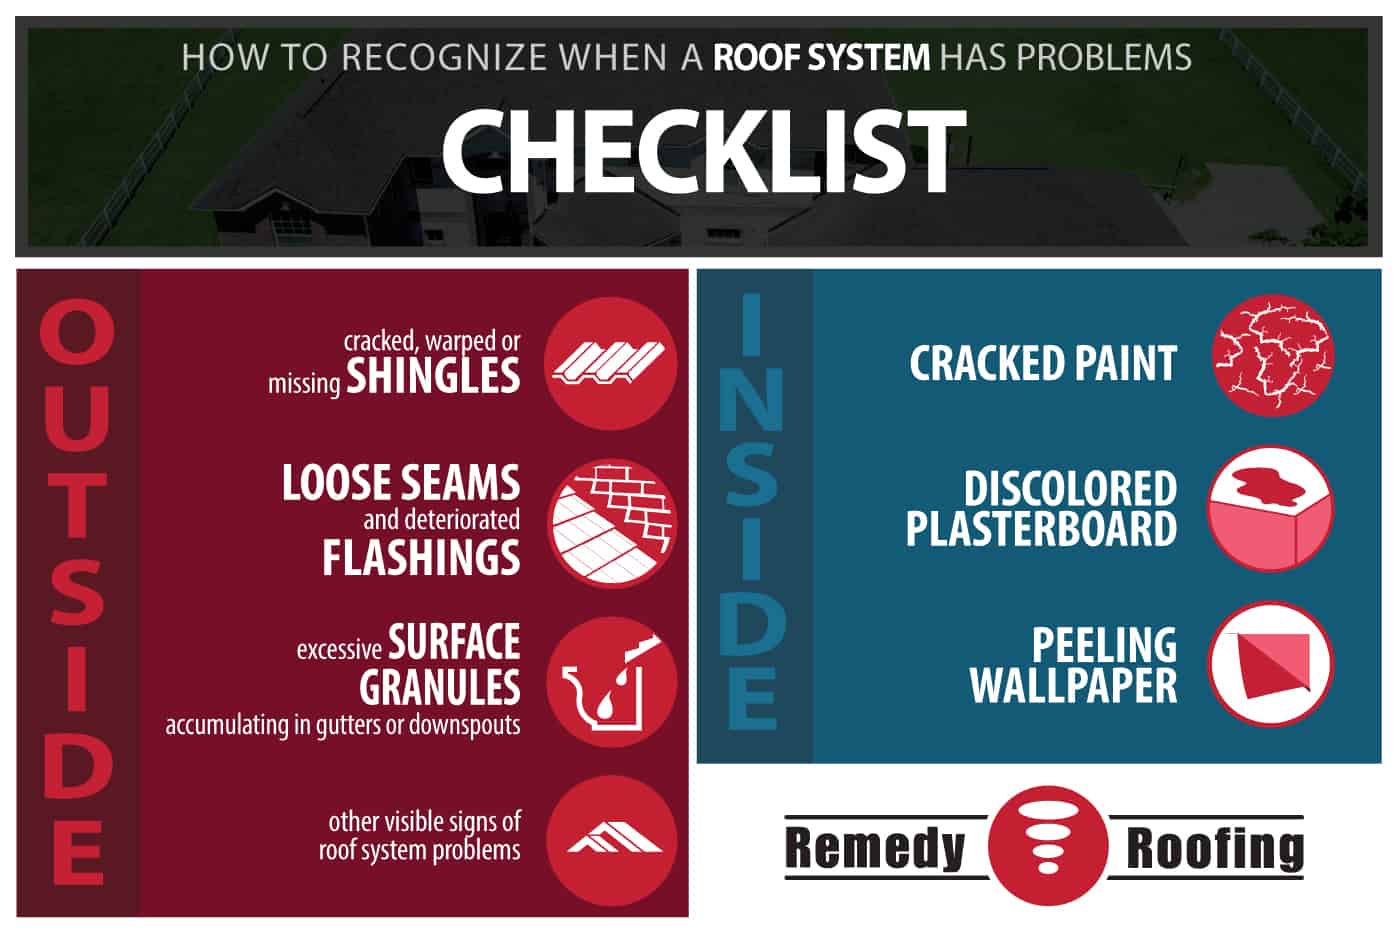 Checklist for common roof problems